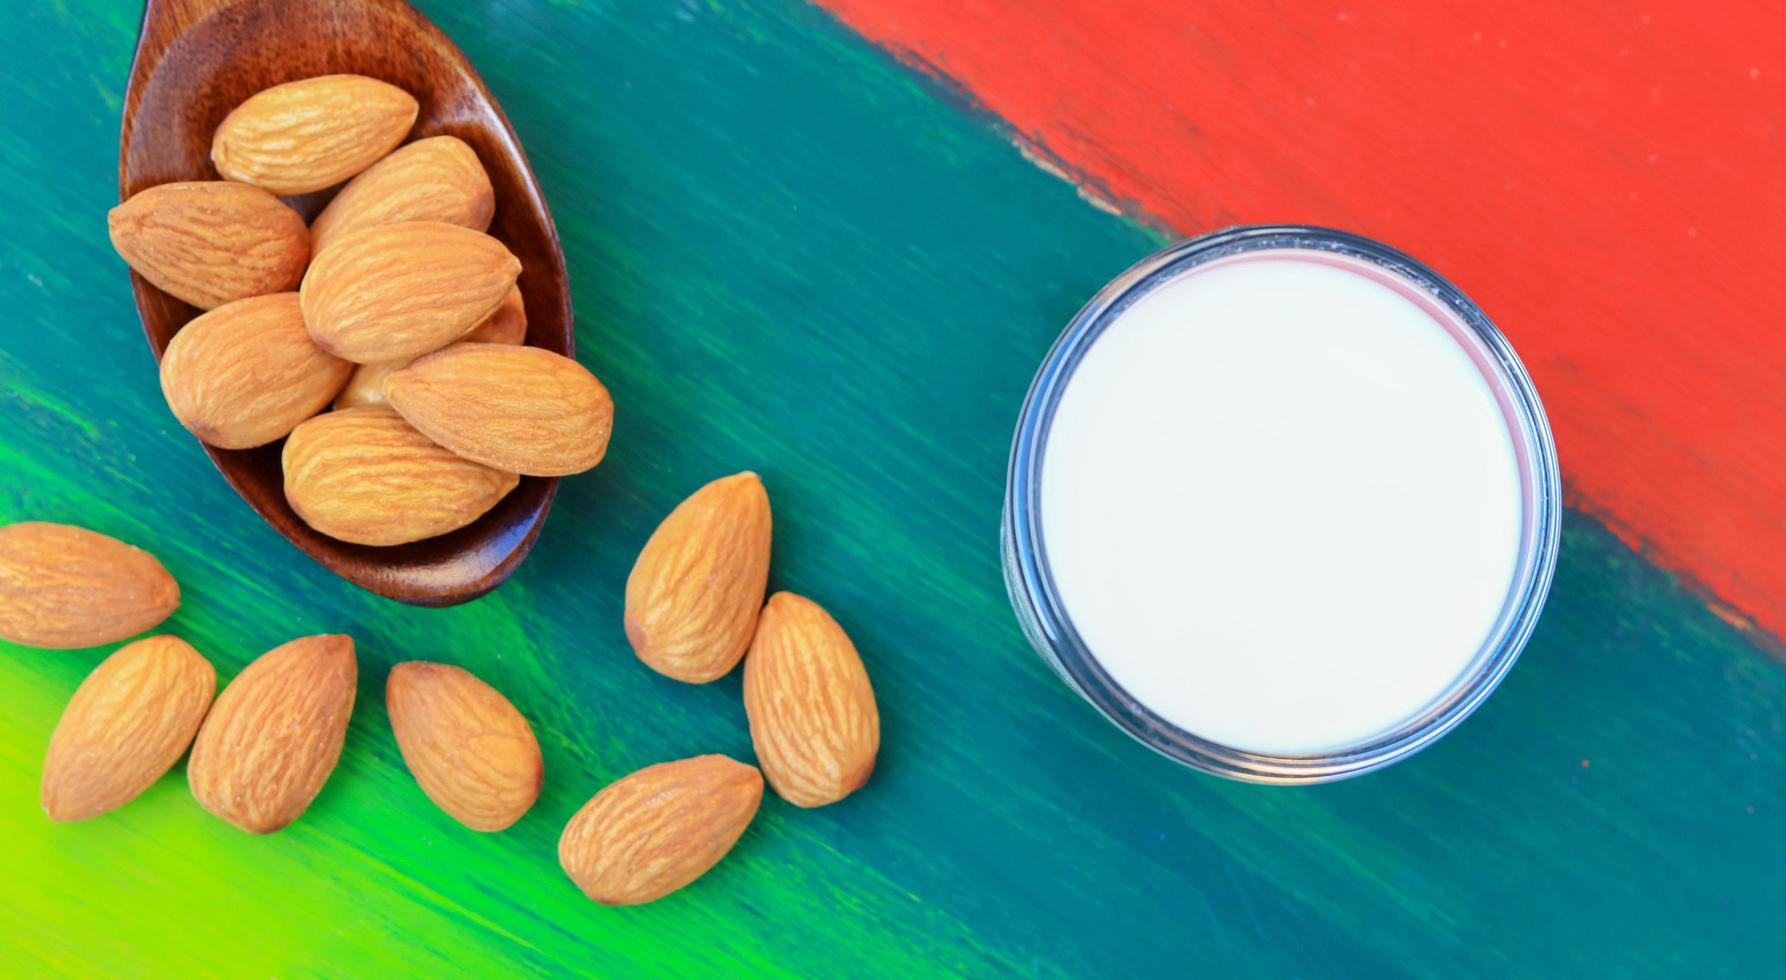 Almonds and milk in a glass on a beautiful colored natural wooden floor photo